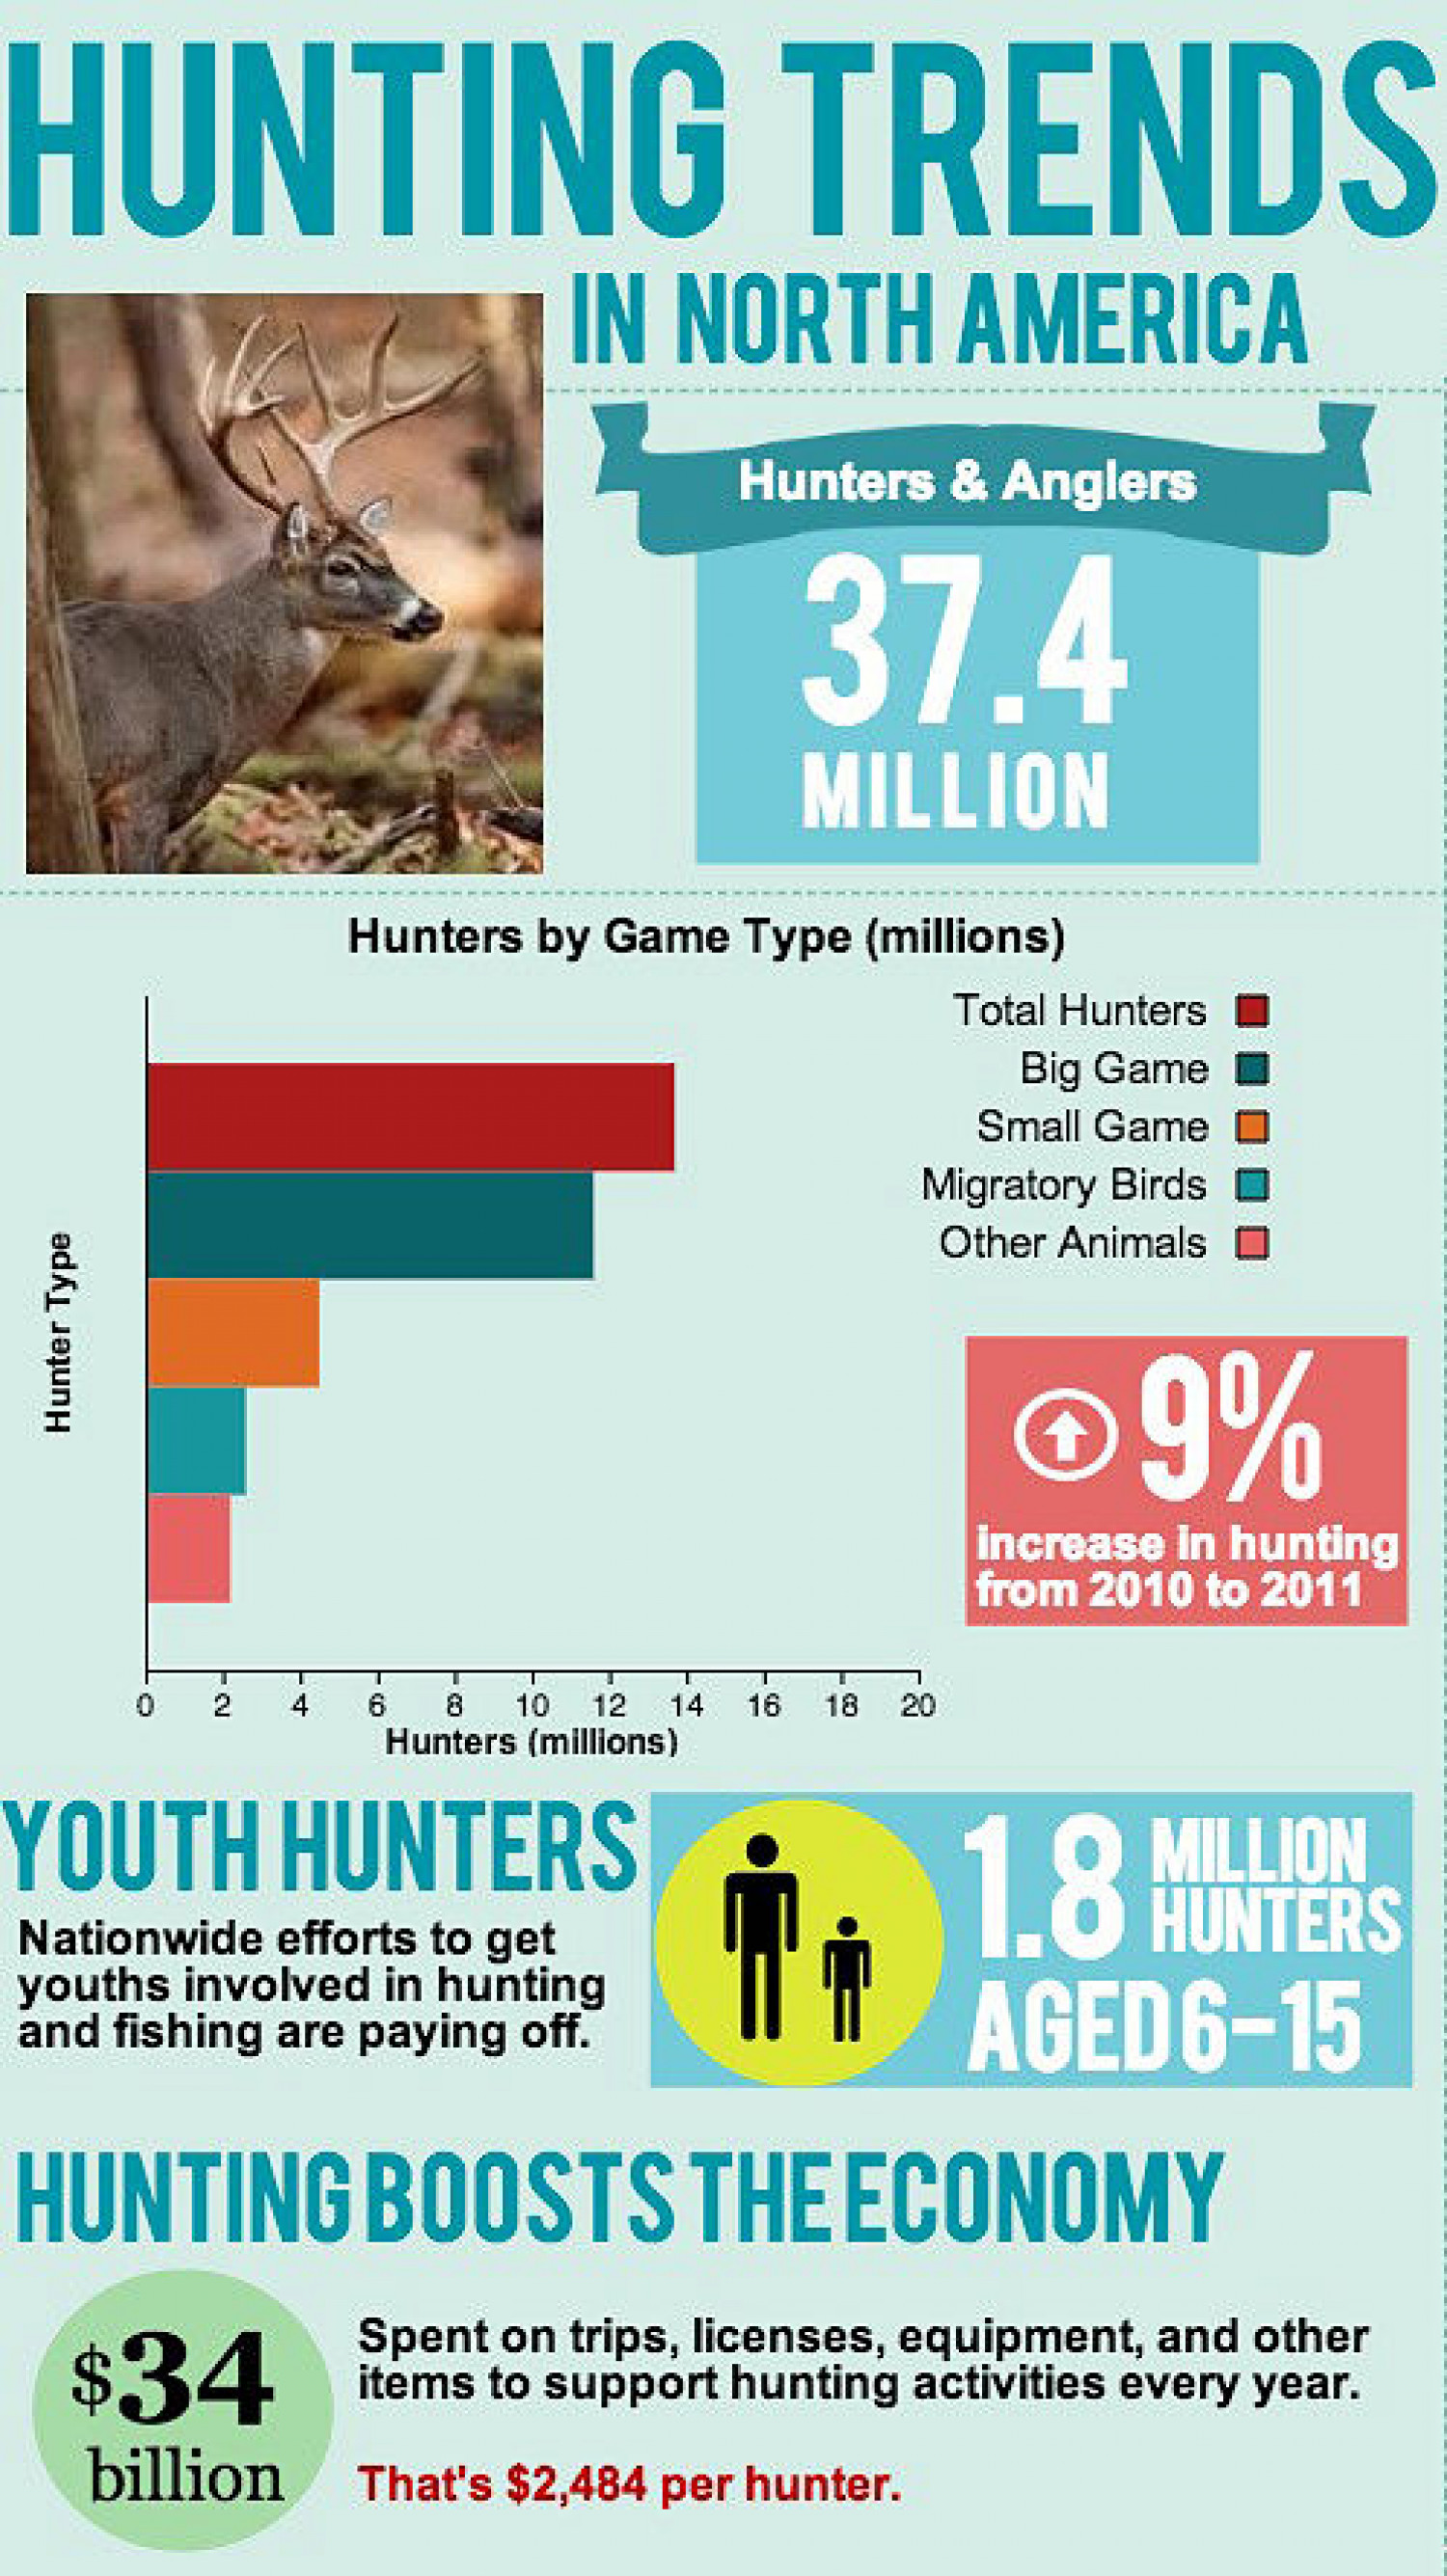 Hunting Trends in North America Infographic